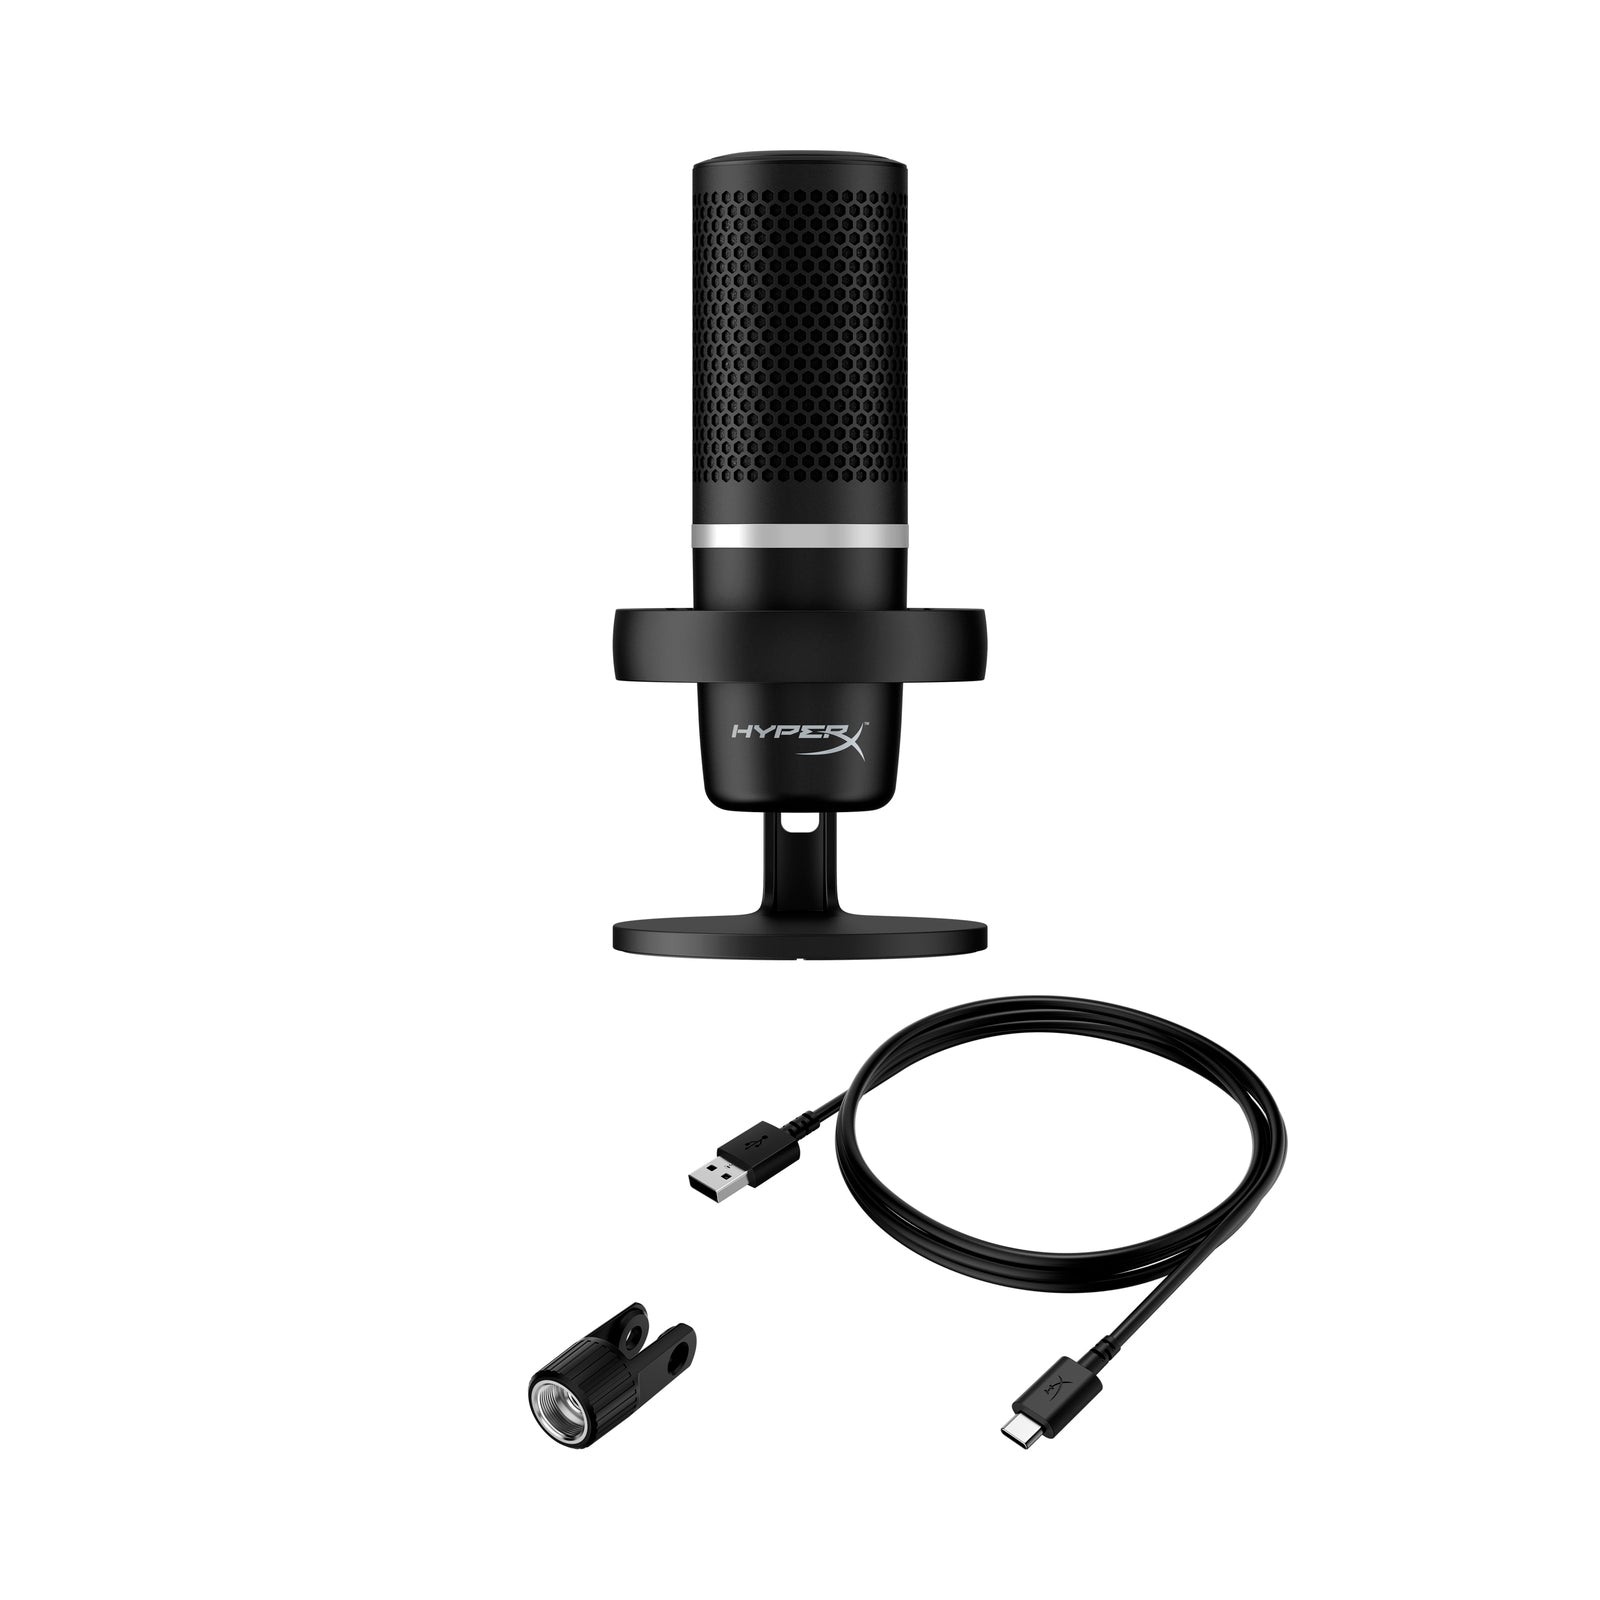  Bundle of HyperX DuoCast – RGB USB Condenser Microphone for PC,  PS5, PS4, Mac, Low-Profile Shock Mount, Cardioid, Omnidirectional, Pop  Filter, Gain Control + HyperX Shield Microphone Pop Filter : Everything